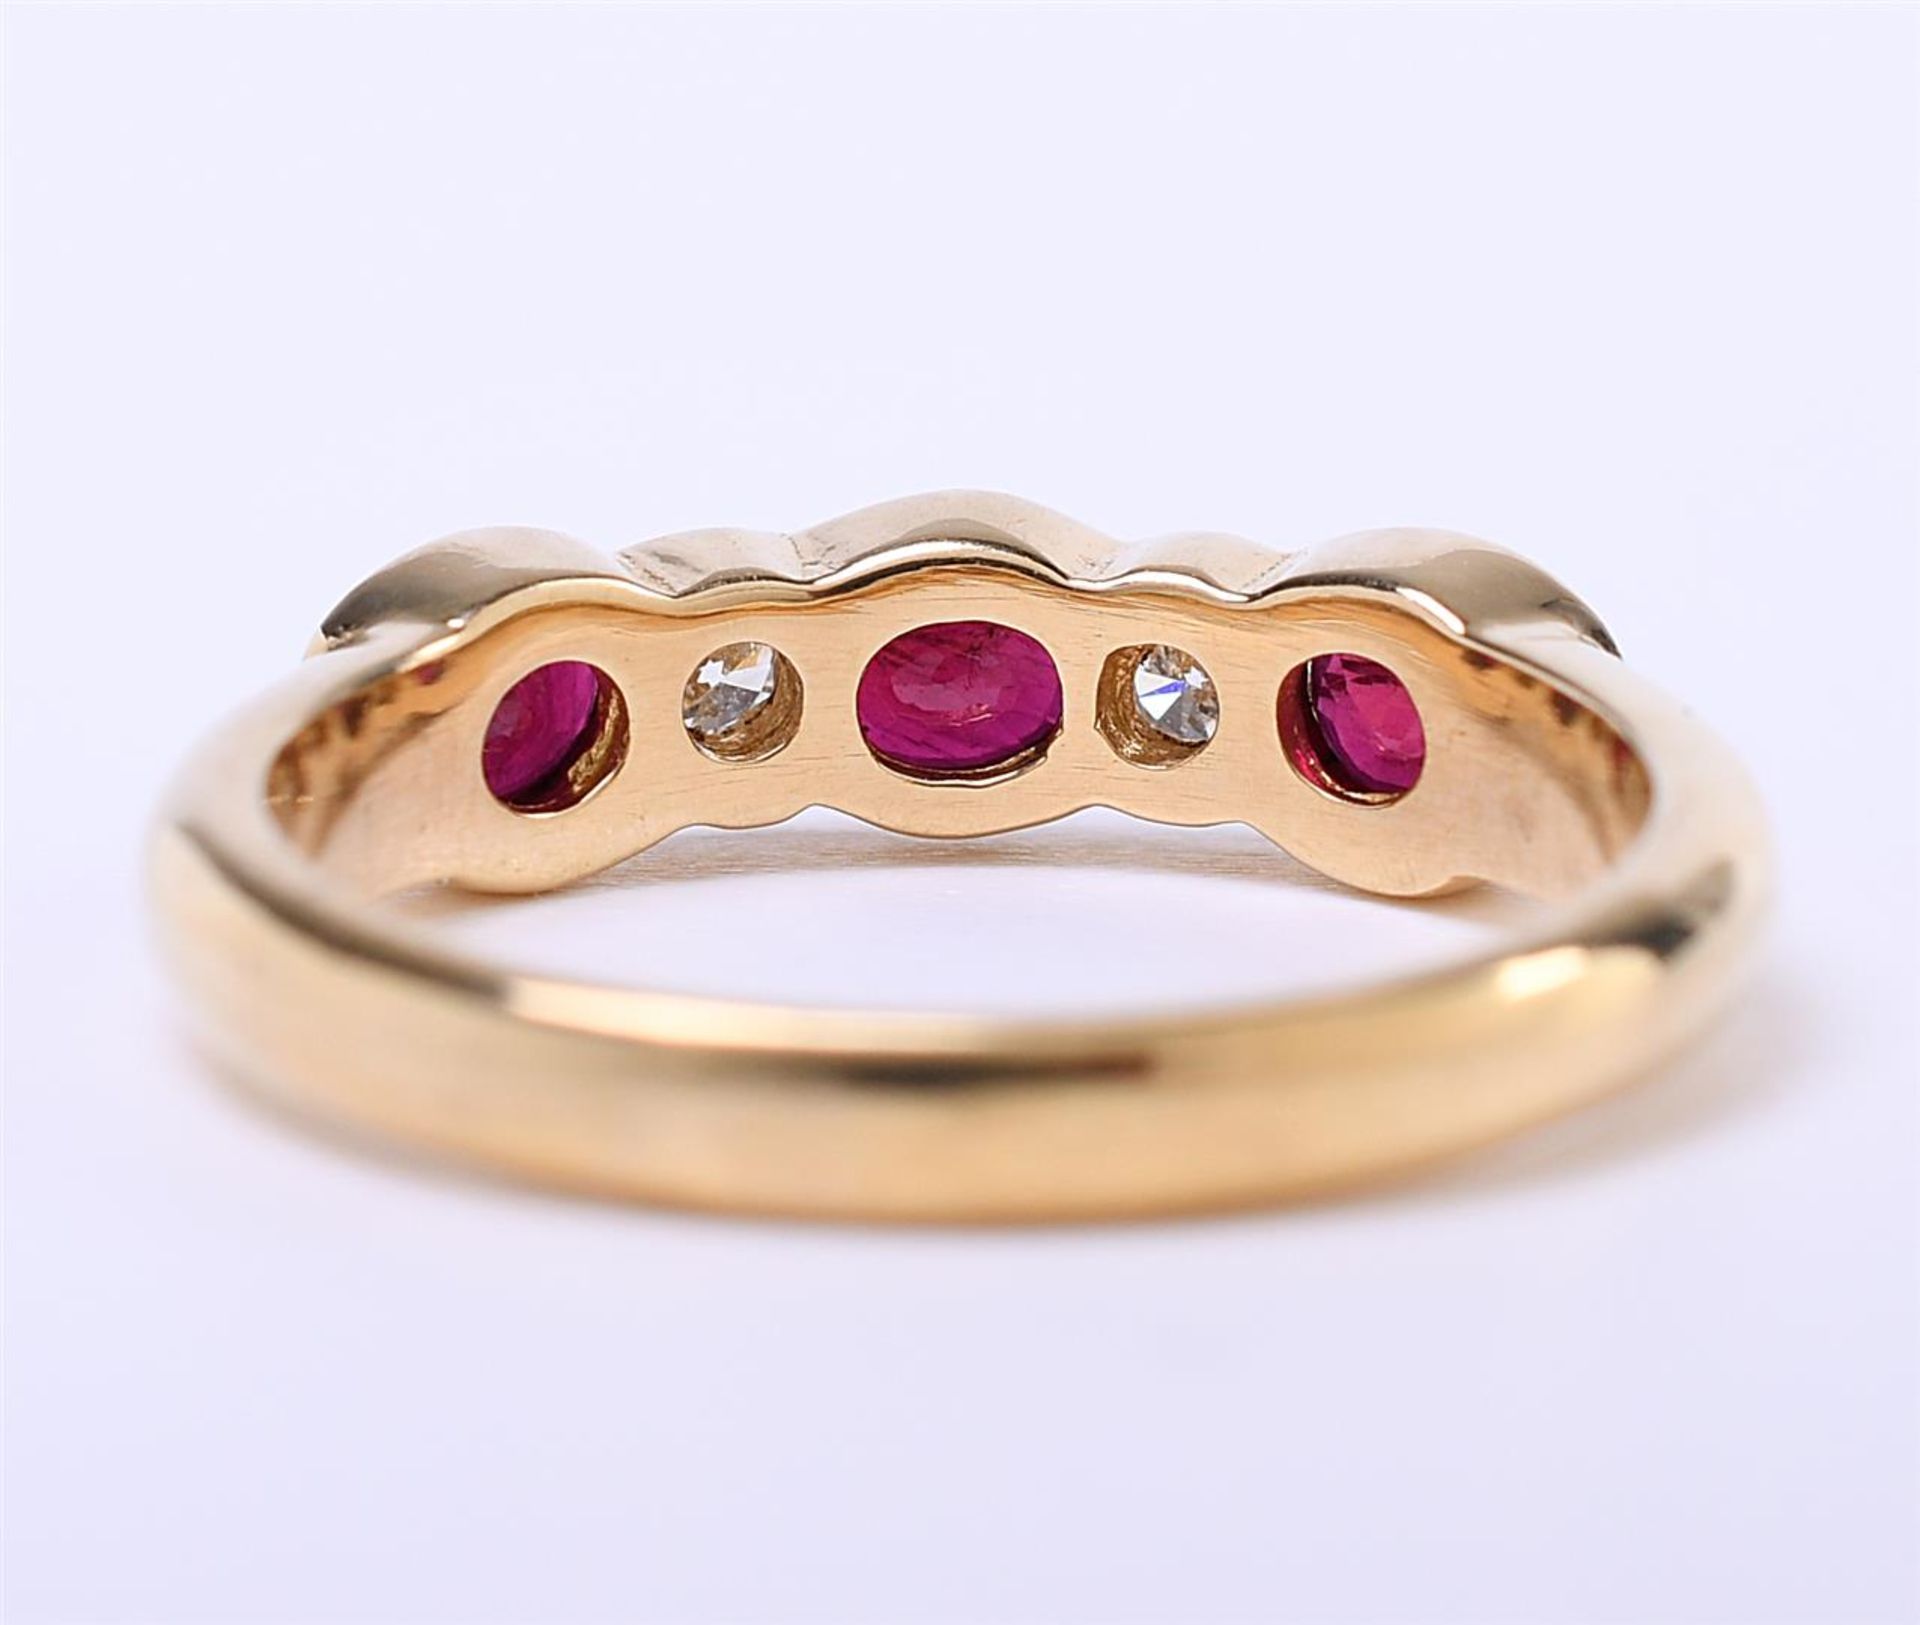 18 carat yellow gold ladies ring set with approximately 3 x oval cut rubies - Image 5 of 5